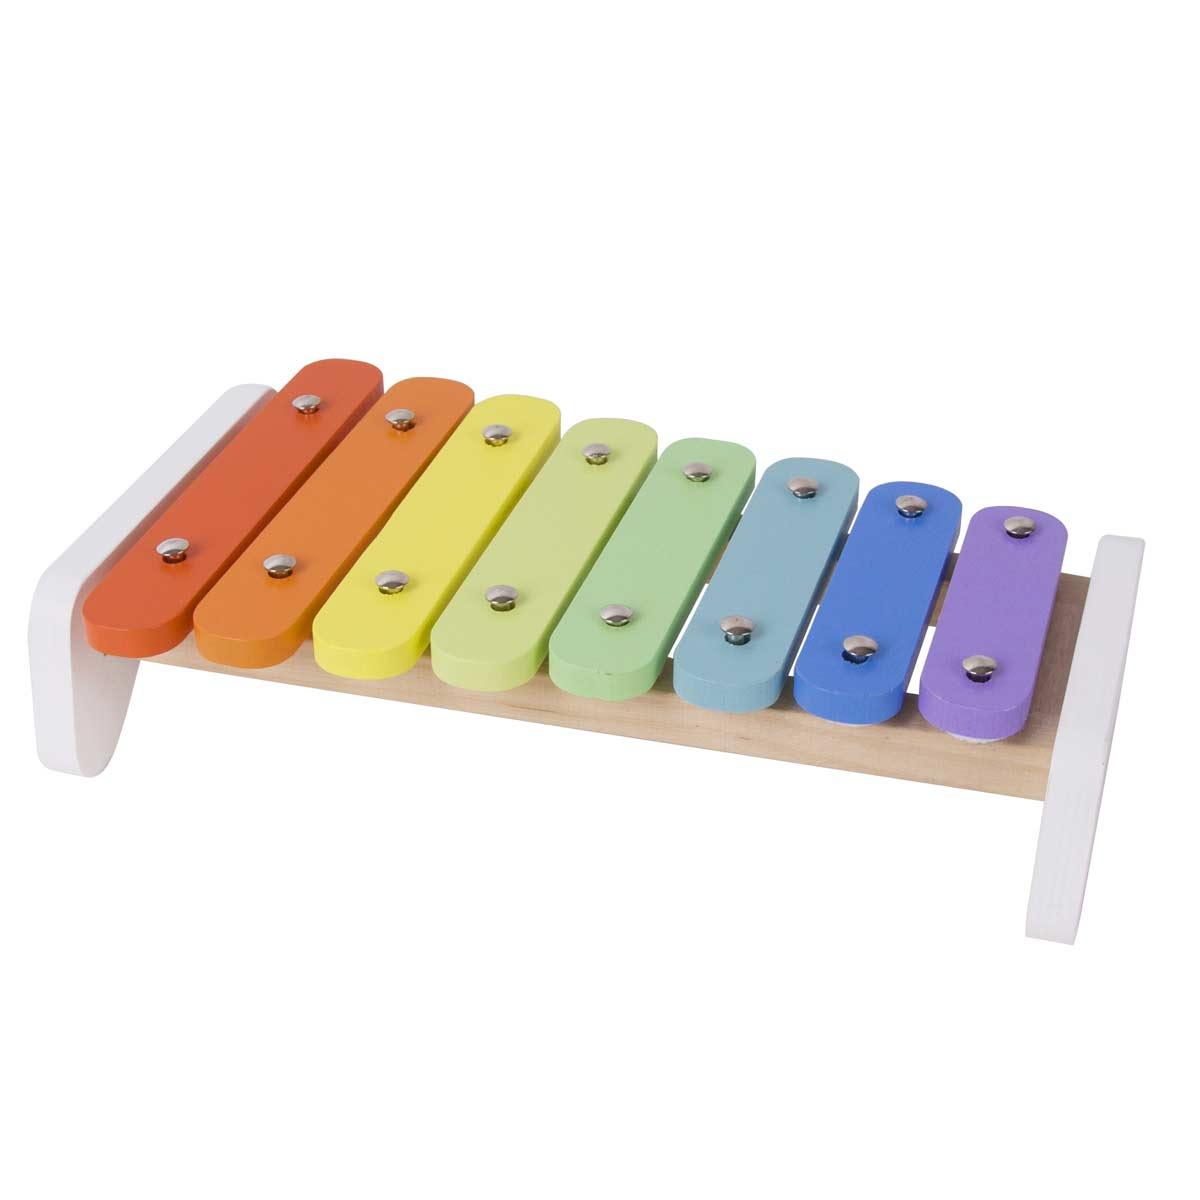 Multicolored wooden xylophone for children - MoonyBoon